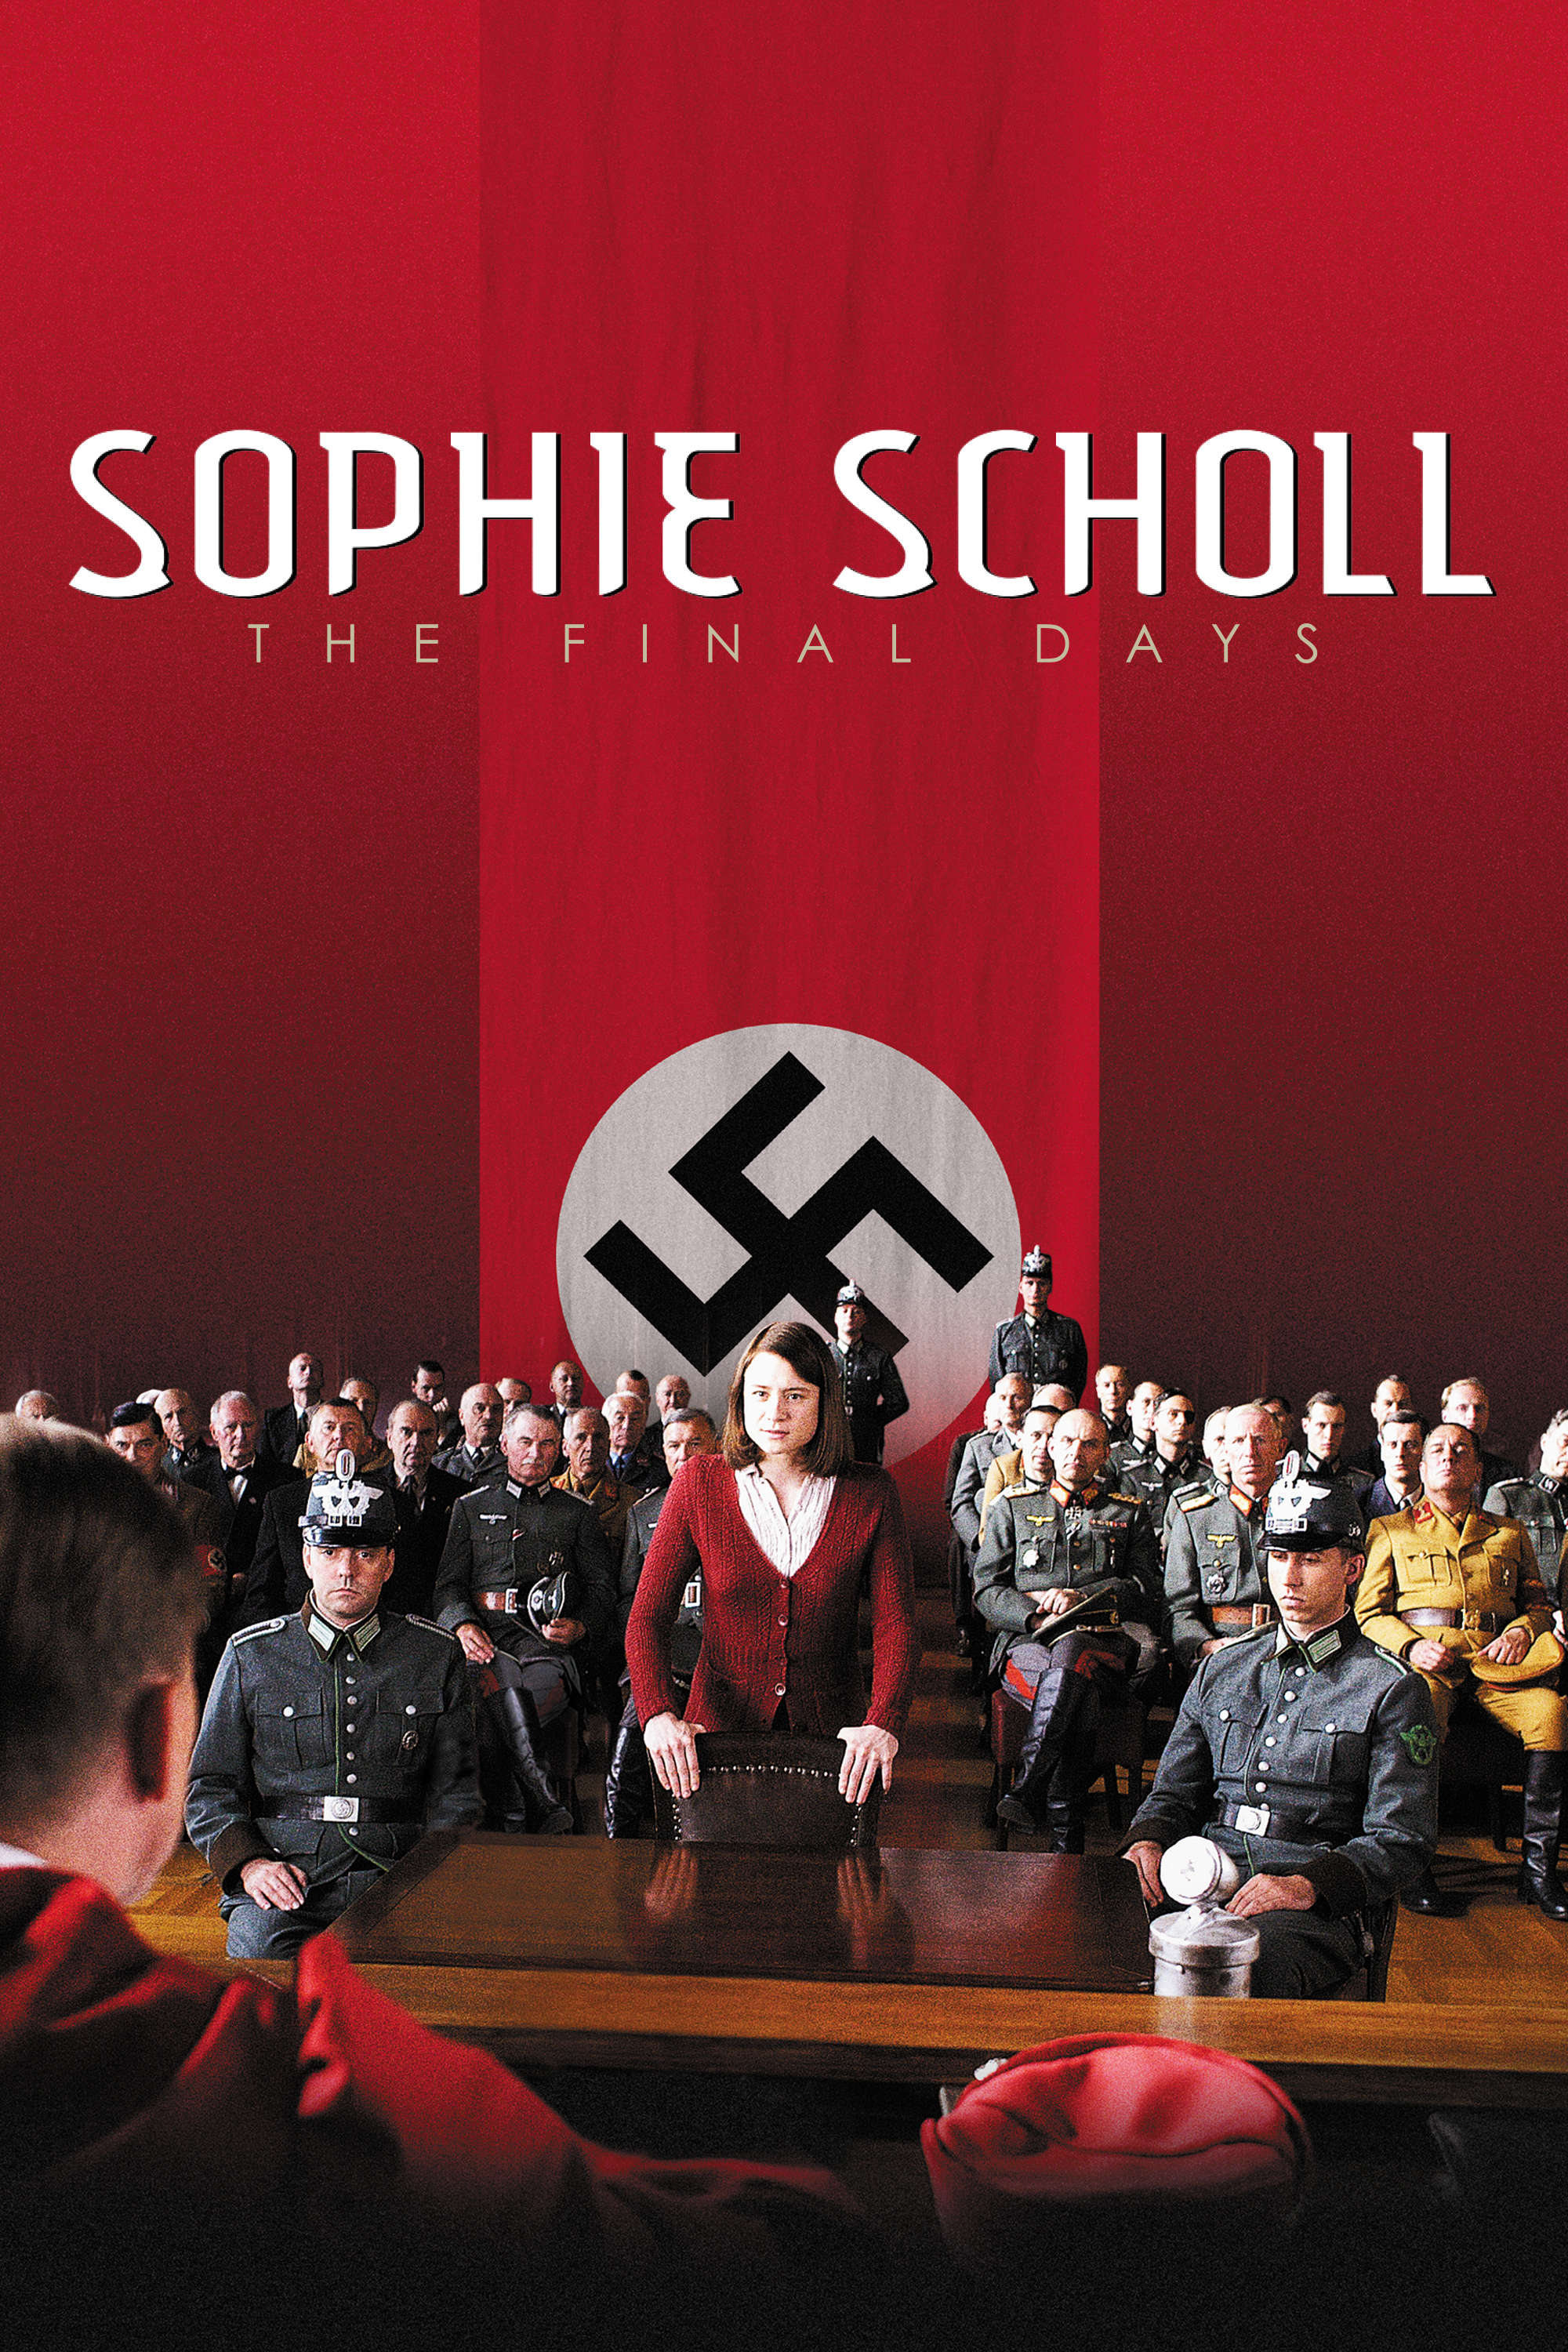 Sophie Scholl - The Final Days